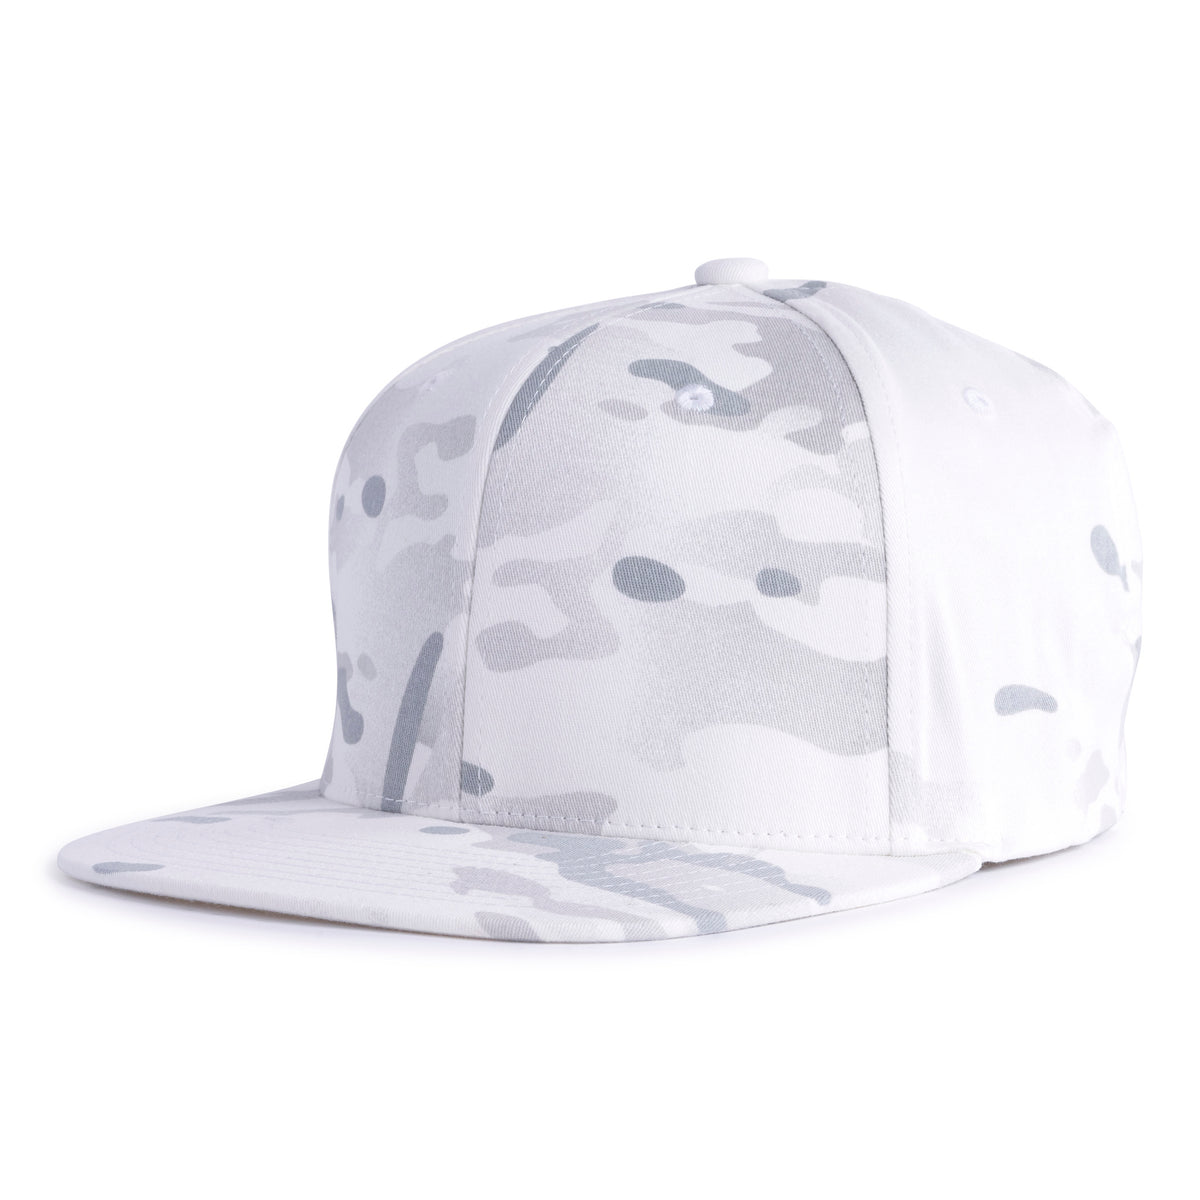 White camo flat bill trucker hat with 6-panels, structured mid/high crown, and a snapback closure from Tailgate Hats.